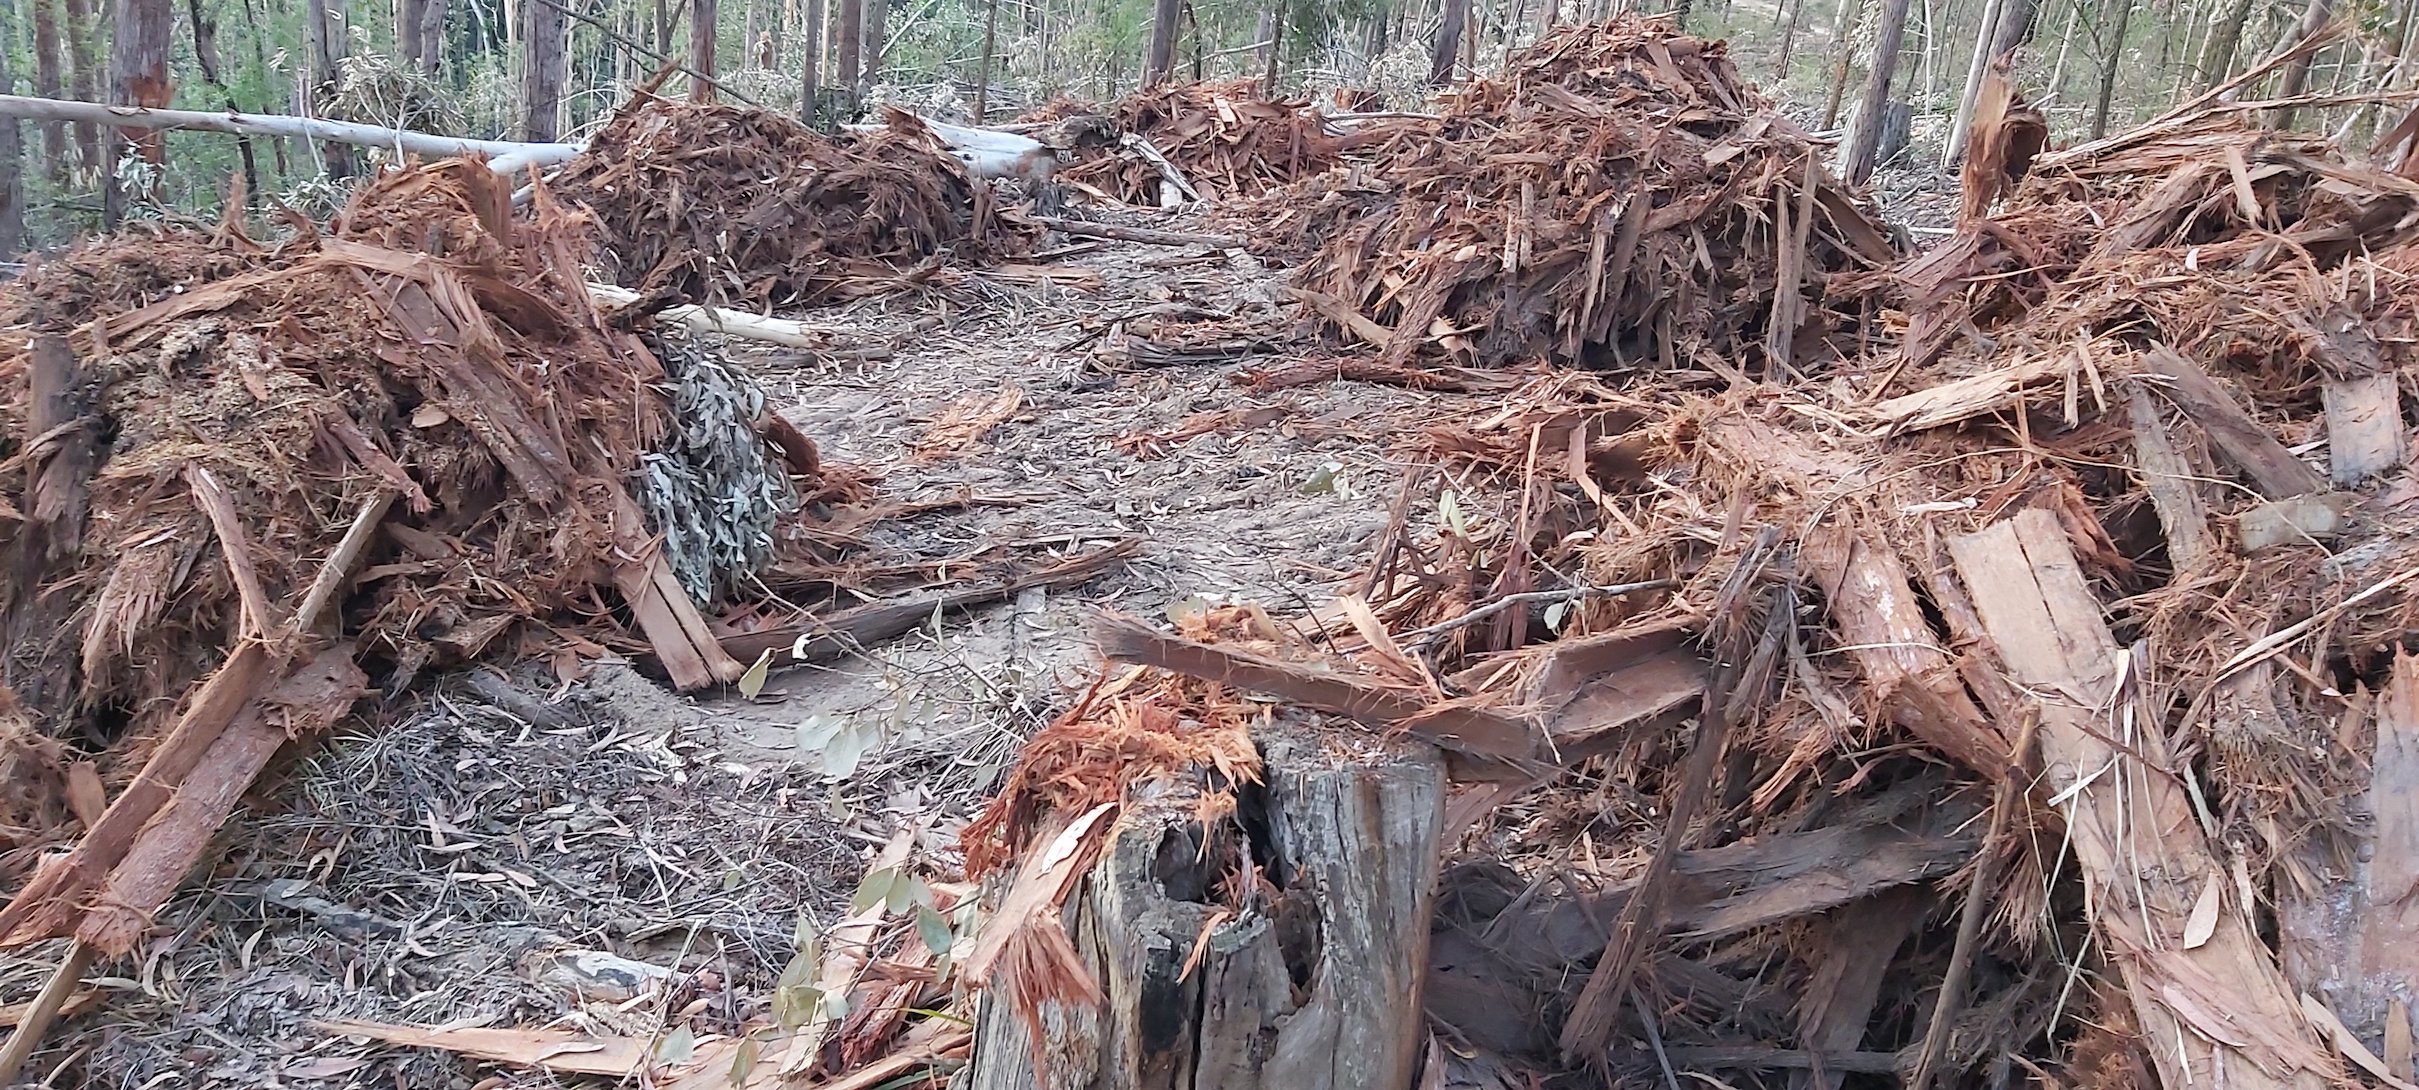 Piles of bark in a forest.